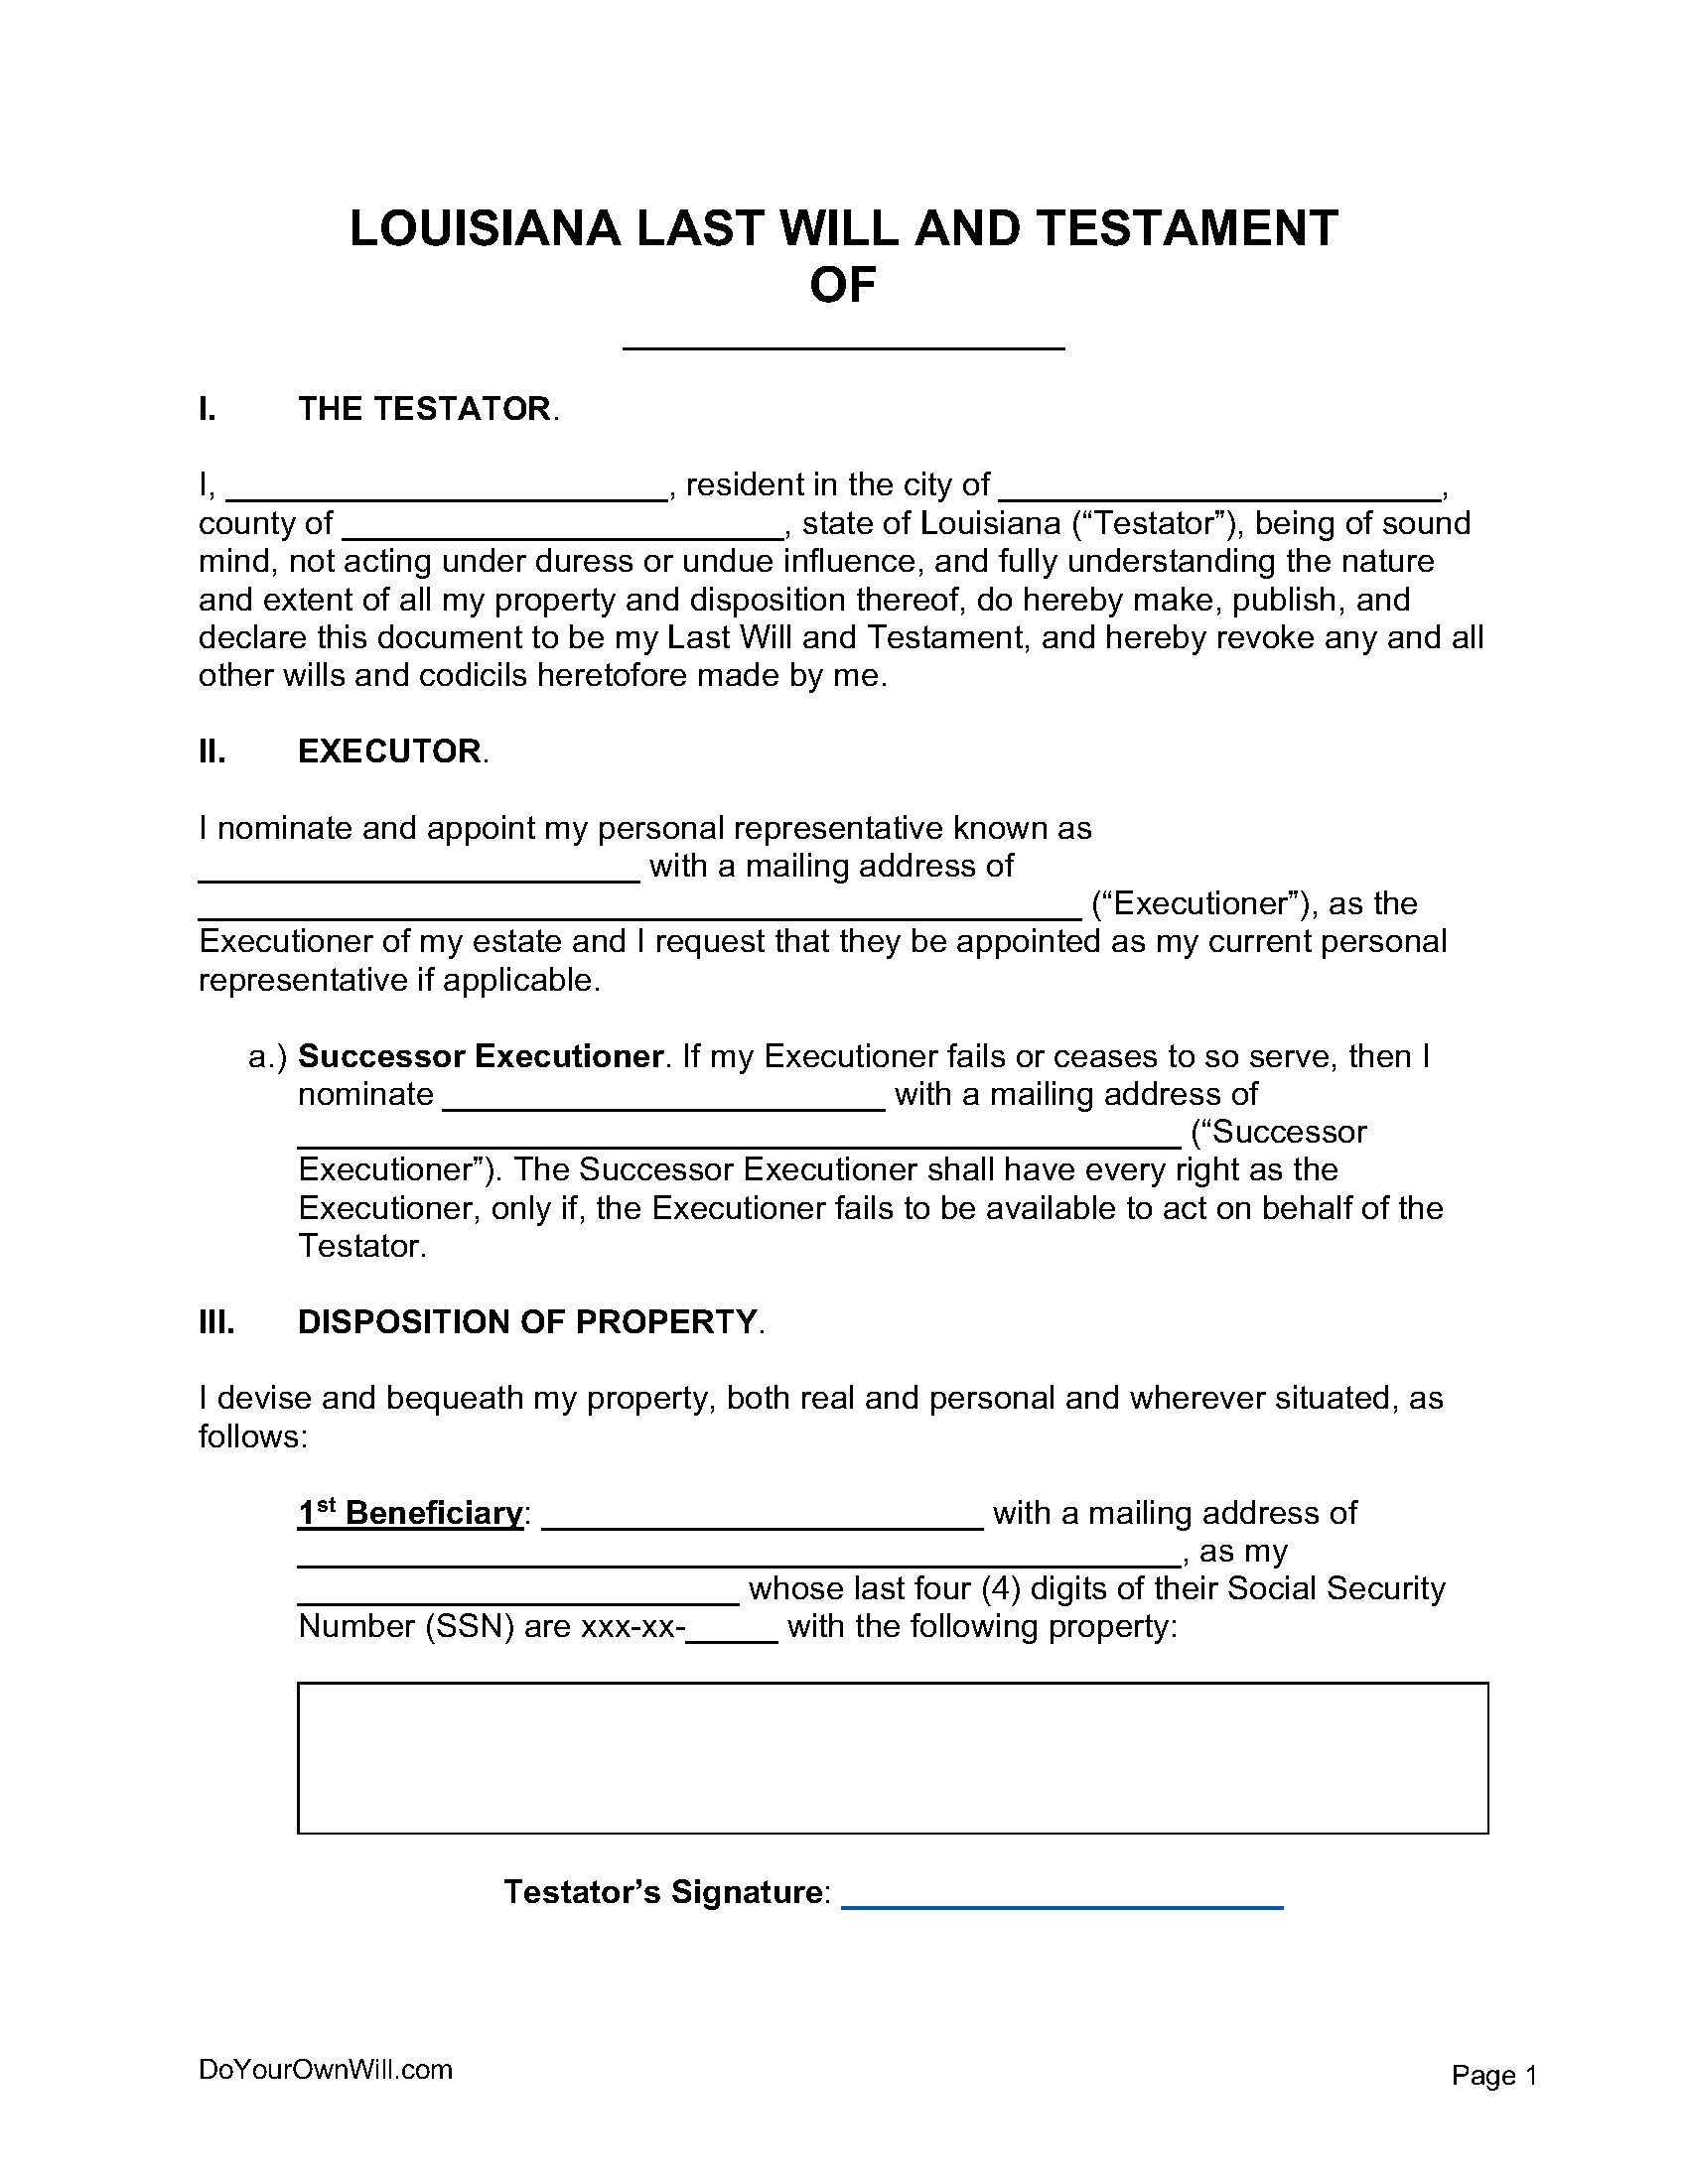 Free Louisiana Last Will and Testament Form PDF WORD 1 ODT